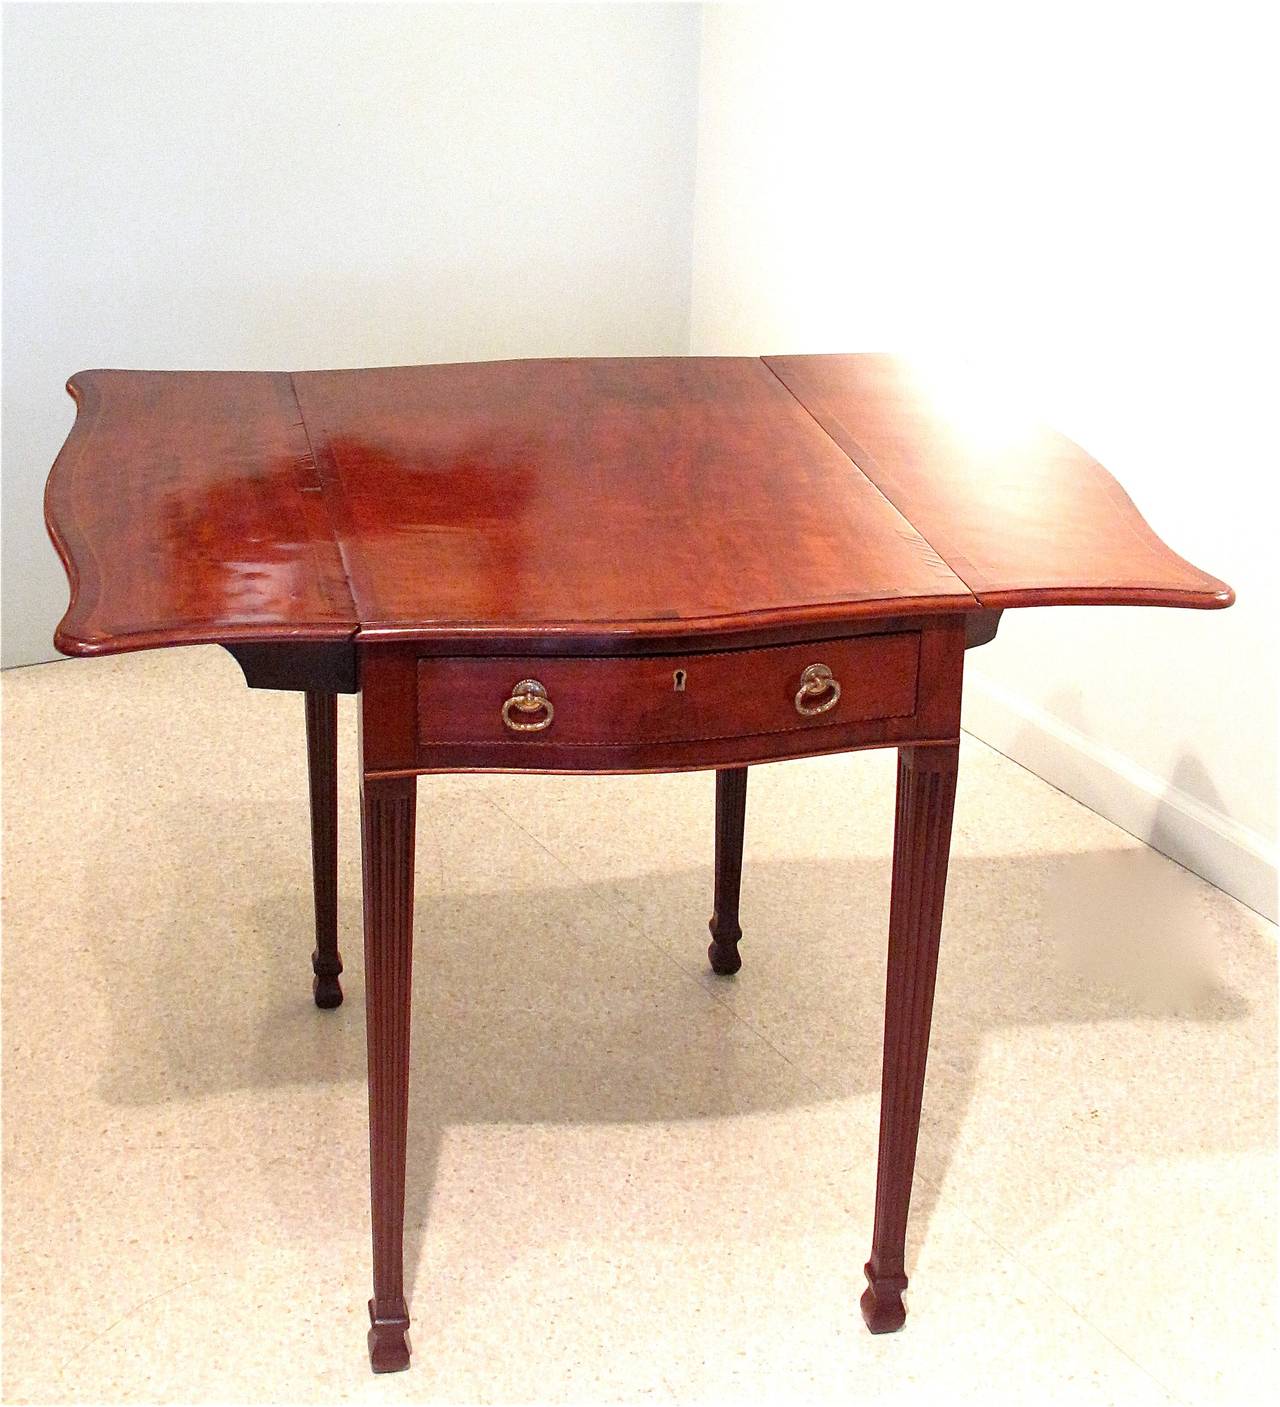 George III Serpentine Inlaid Mahogany Pembroke Table, 18th Century For Sale 1